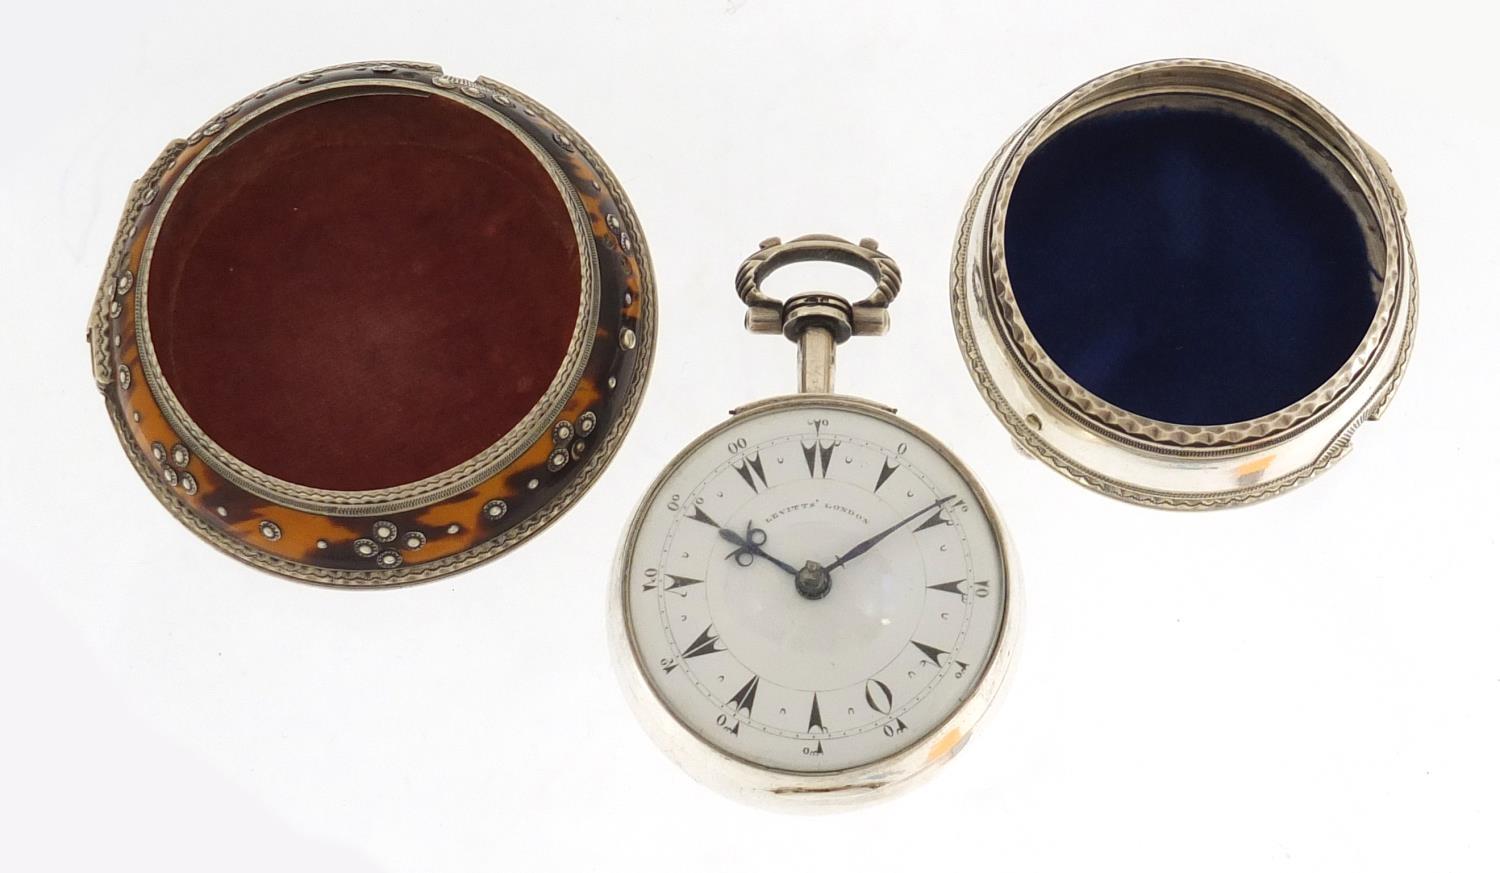 Gentlemen's silver and tortoiseshell double pair cased pocket watch with verge fusée movement, the - Image 19 of 19